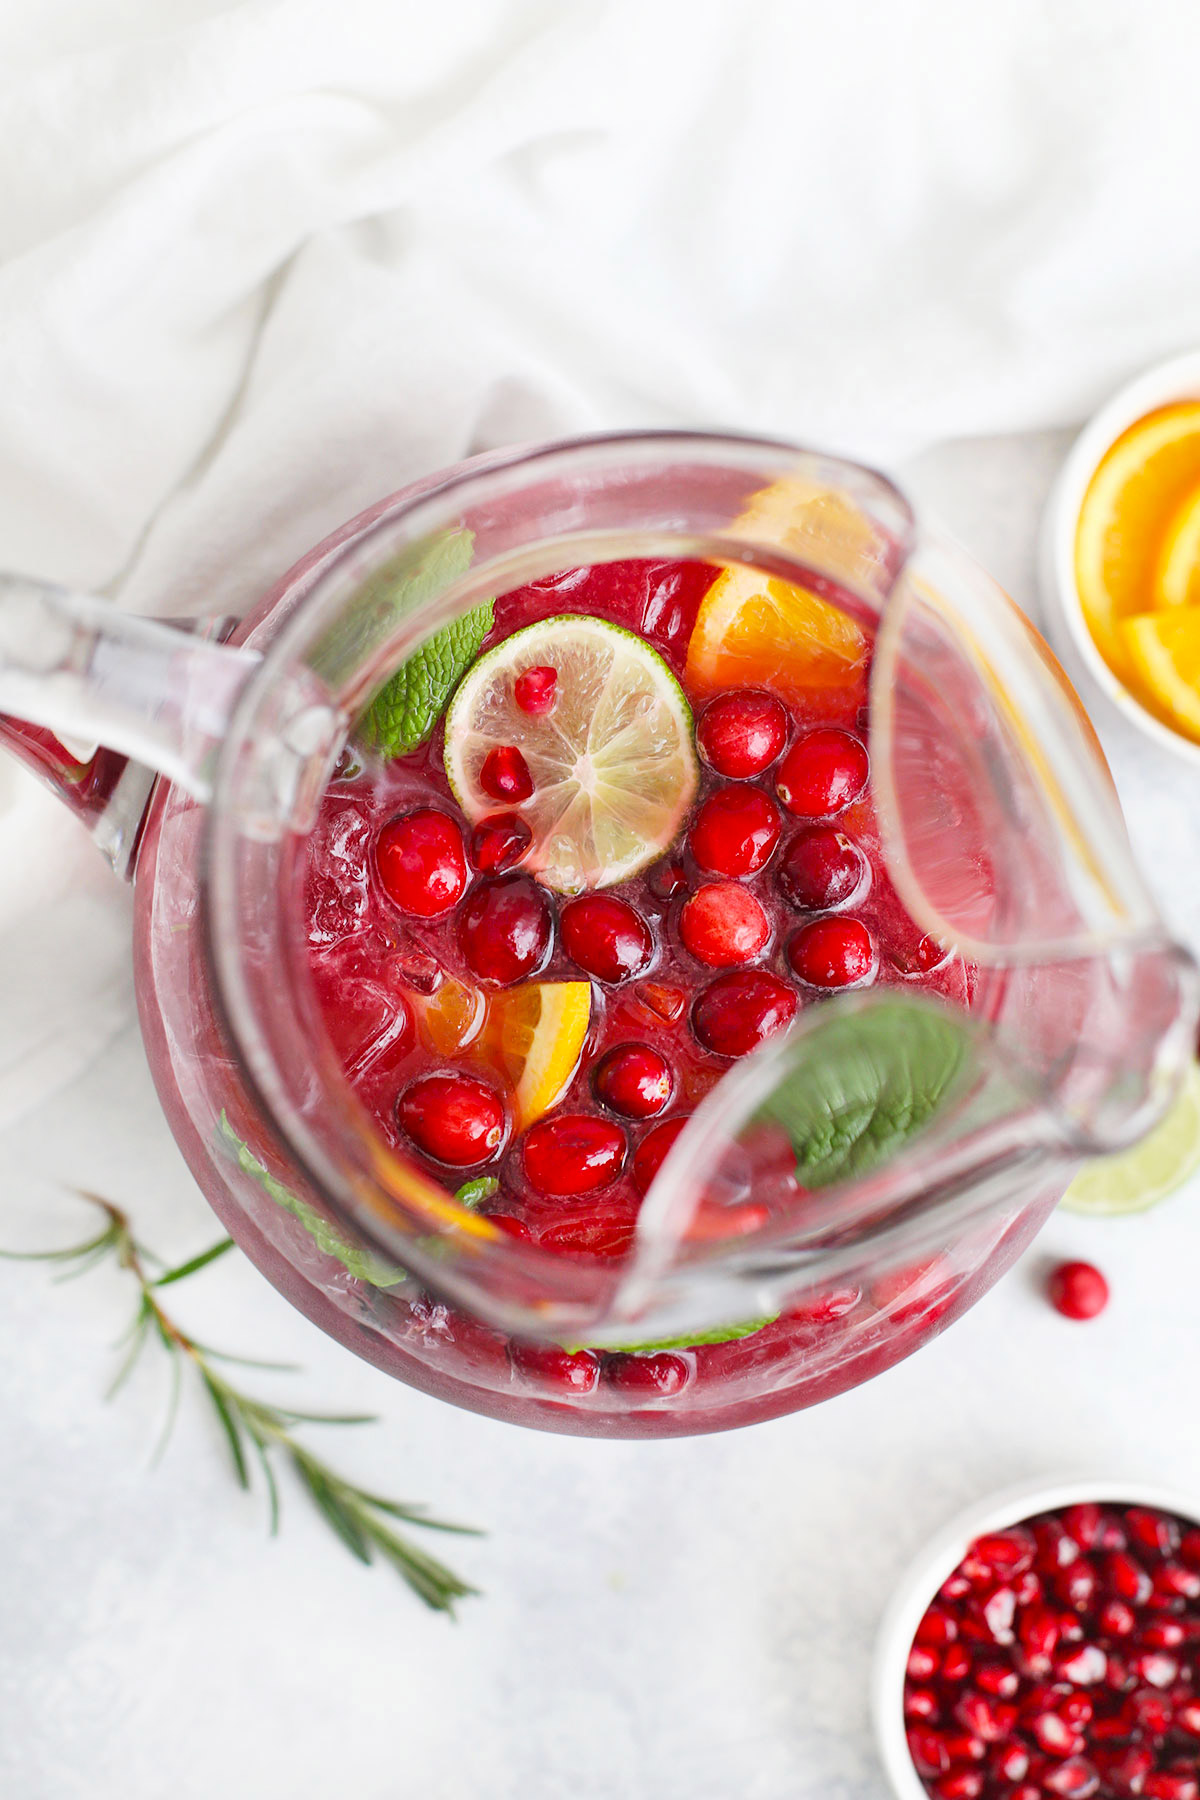 Overhead view of a pitcher of Sparkling Citrus Pomegranate Mocktail